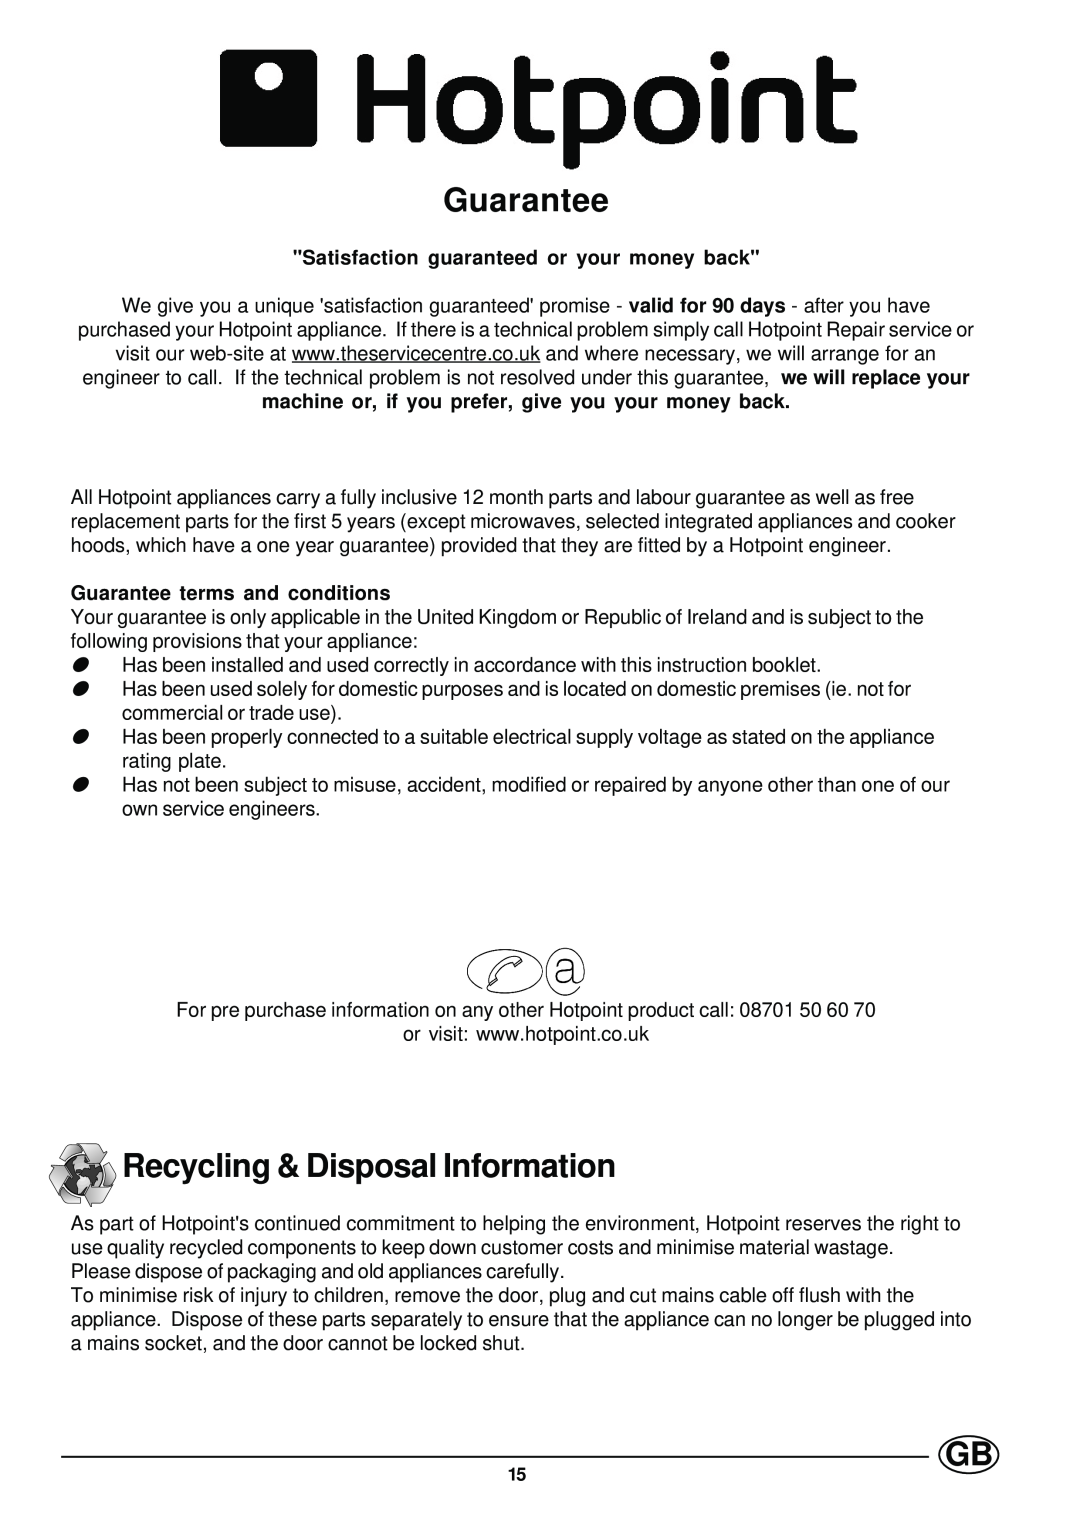 Hotpoint ST55X - ST52 manual Guarantee, Recycling & Disposal Information, Satisfaction guaranteed or your money back 